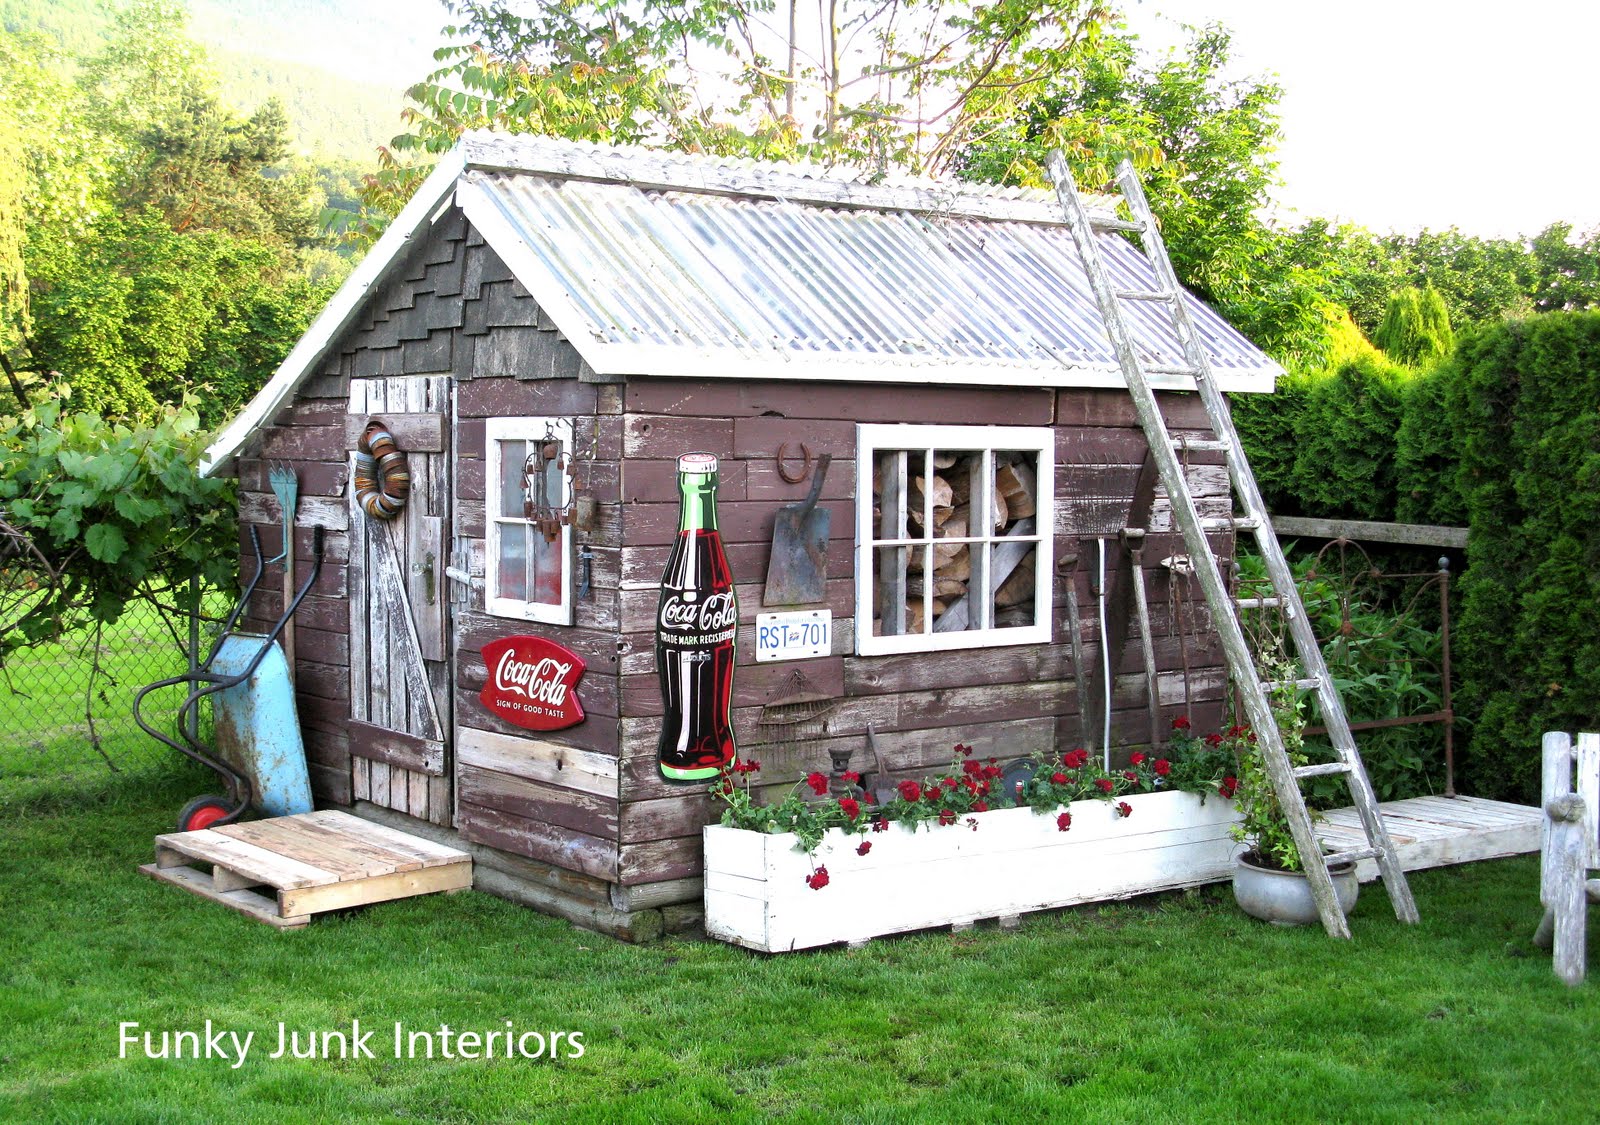 Decorating the great outdoors with junk for 'Gitter Done ...